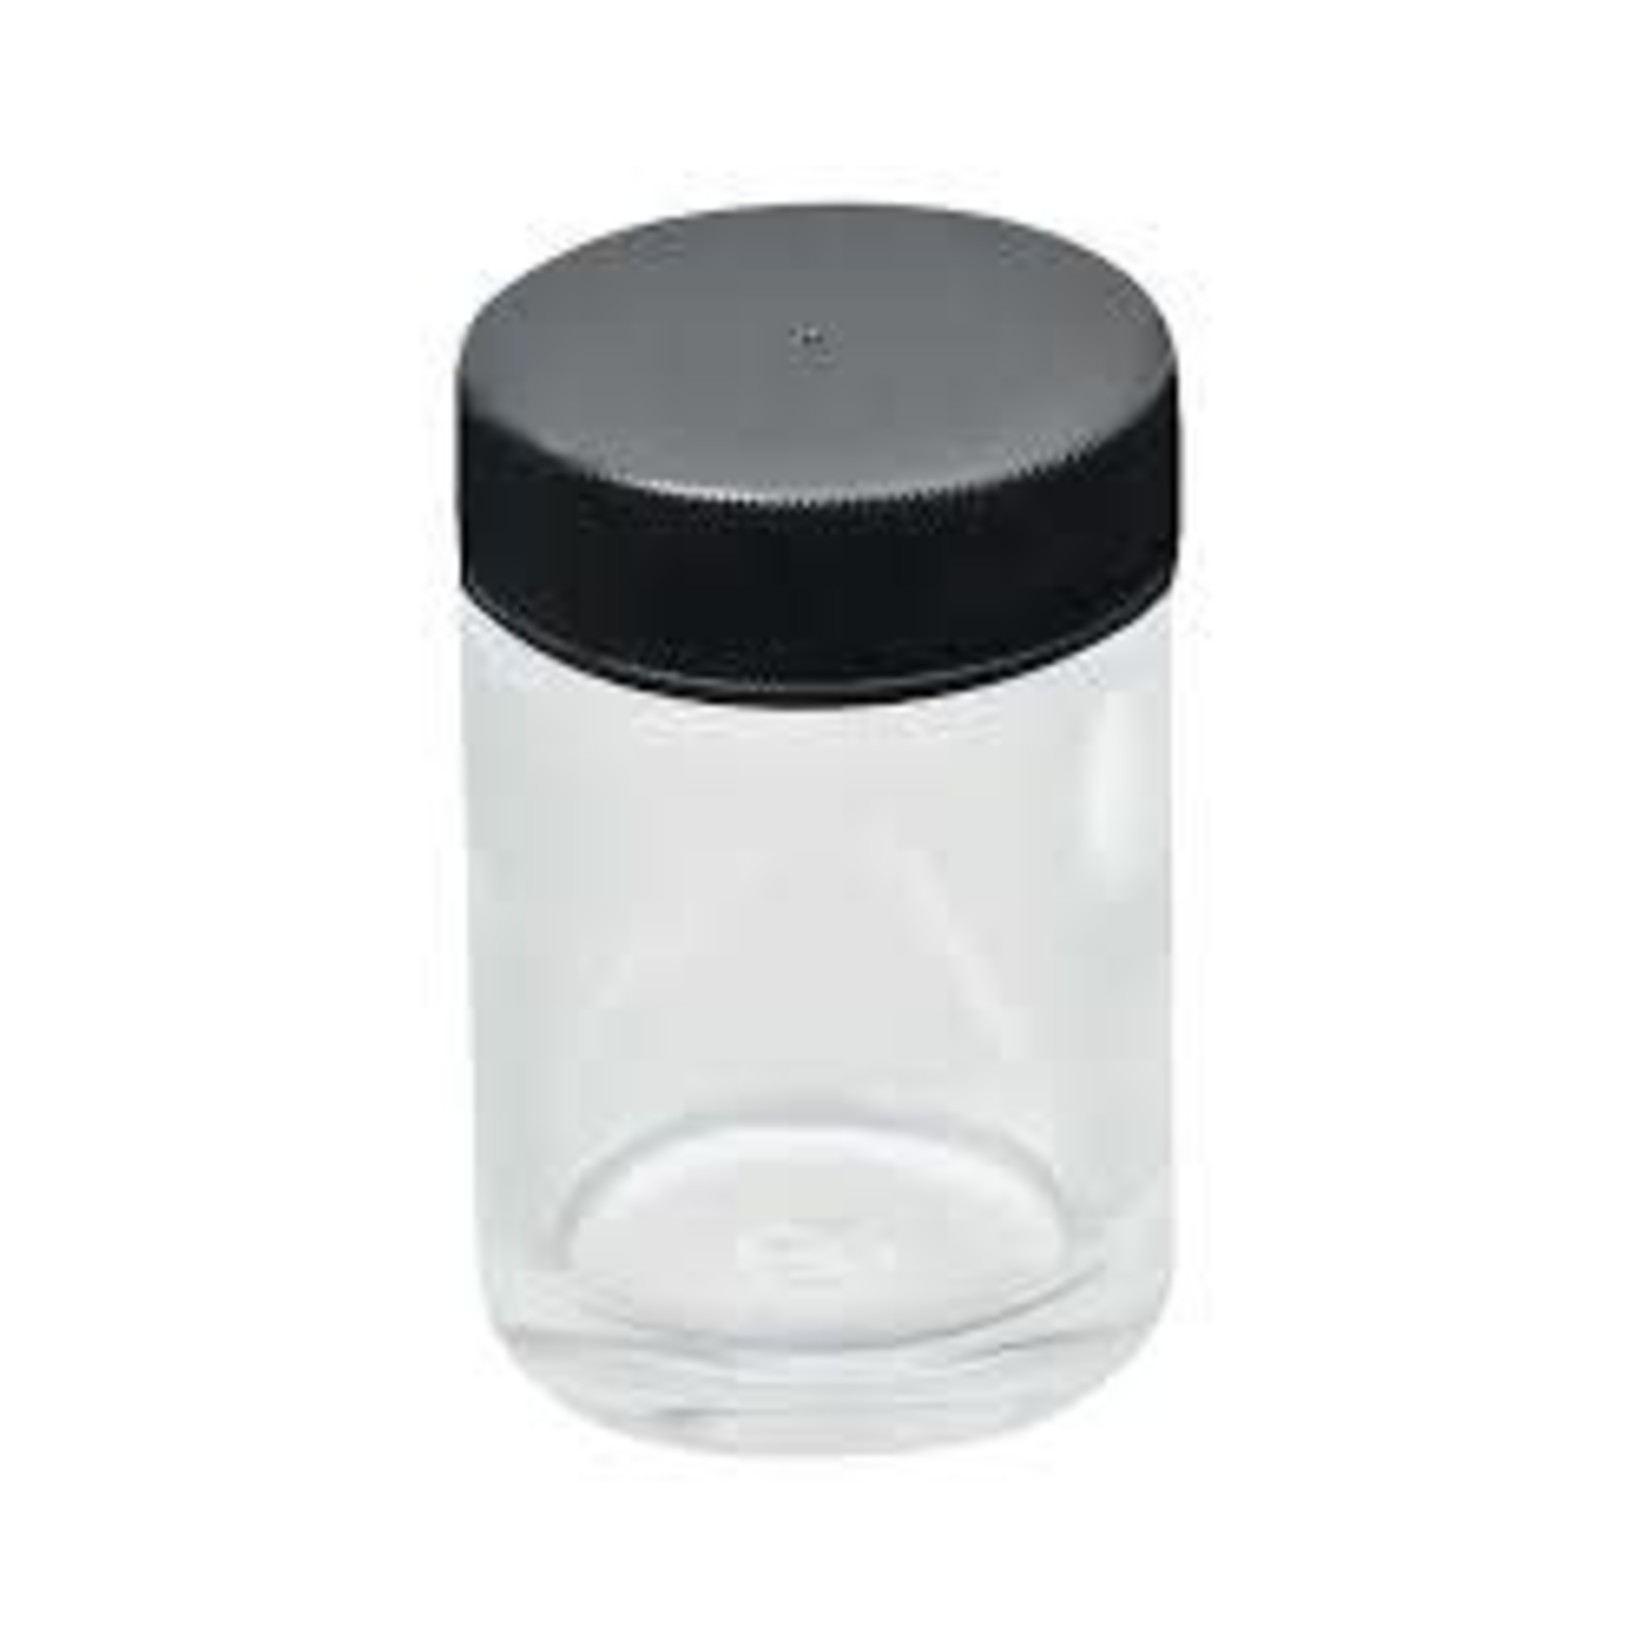 Badger Paint Jar and Cover 3/4 oz.